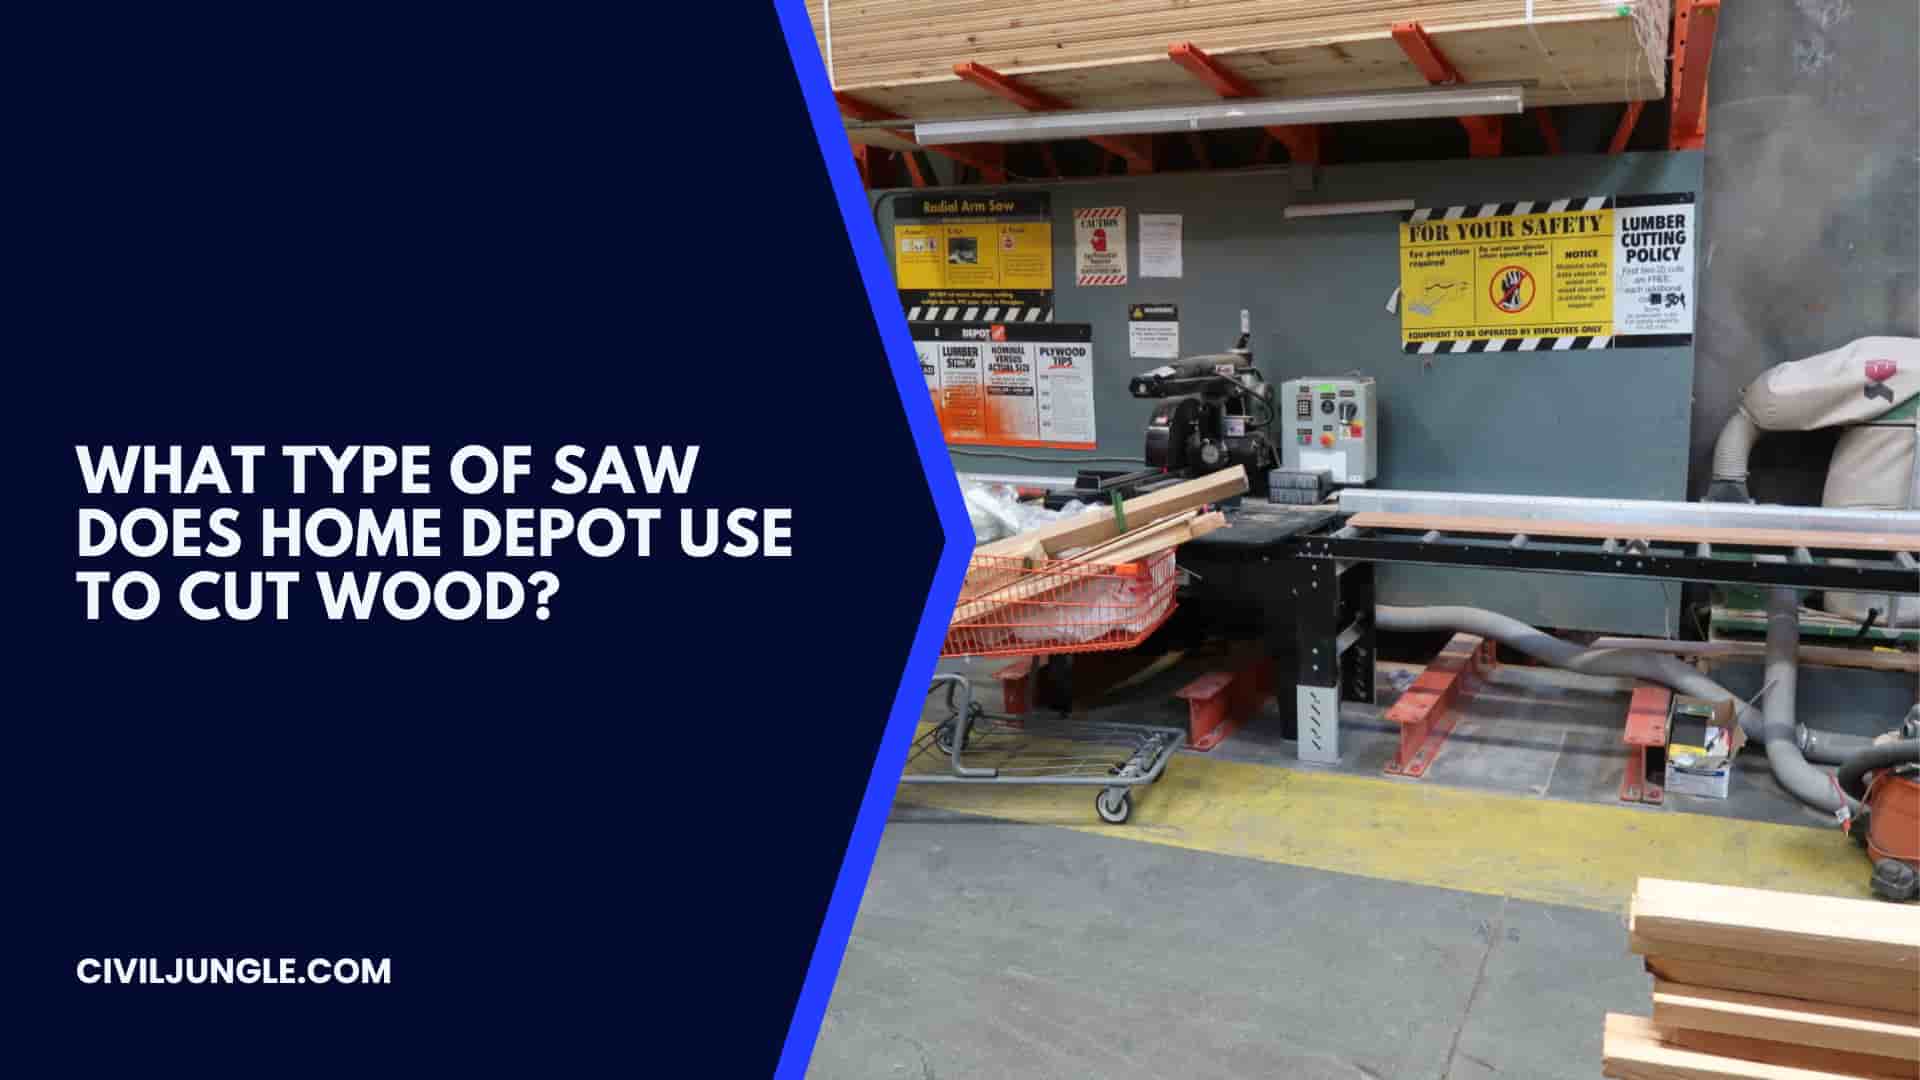 What Type Of Saw Does Home Depot Use To Cut Wood?